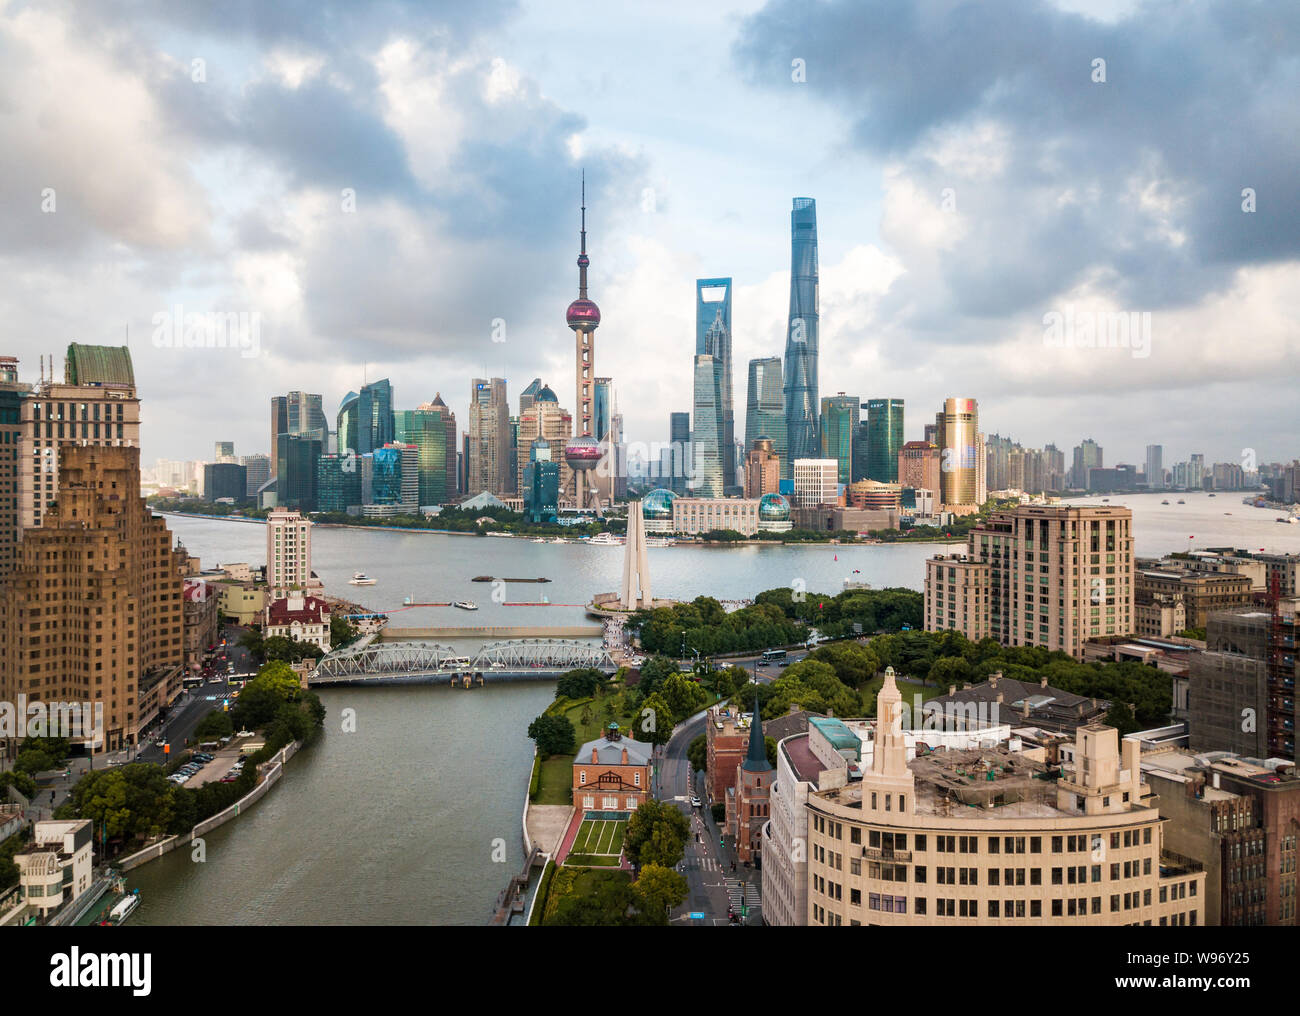 Shanghai skyline aerial view with amazing skyscrapers rising above Haungpu river in China Stock Photo